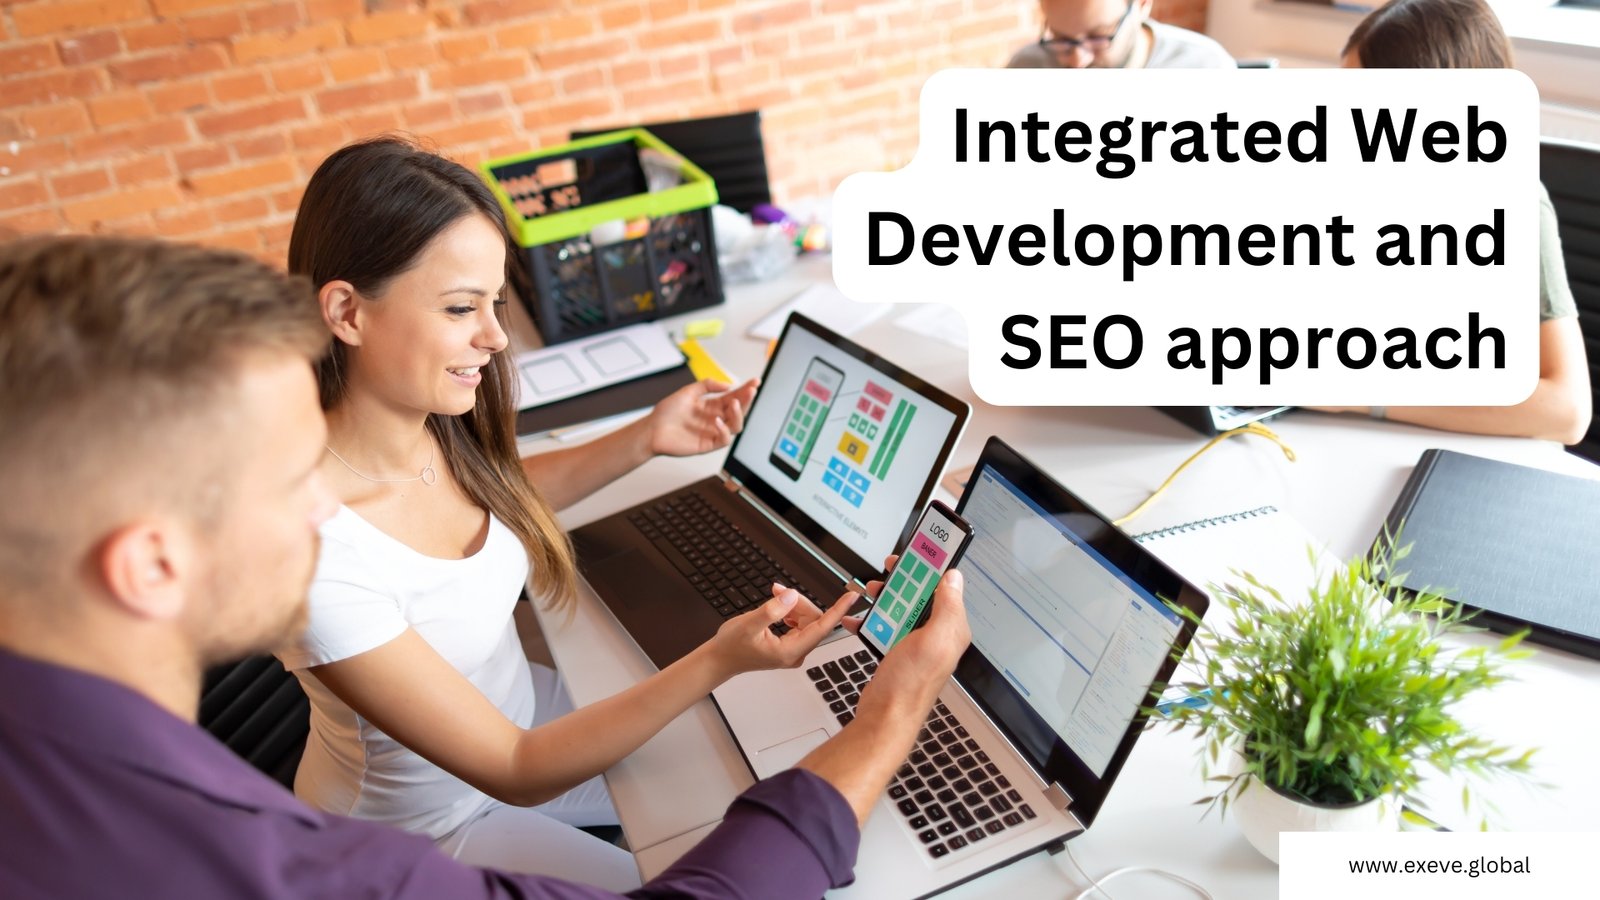 Benefits of Integrated Web Development and SEO Approach